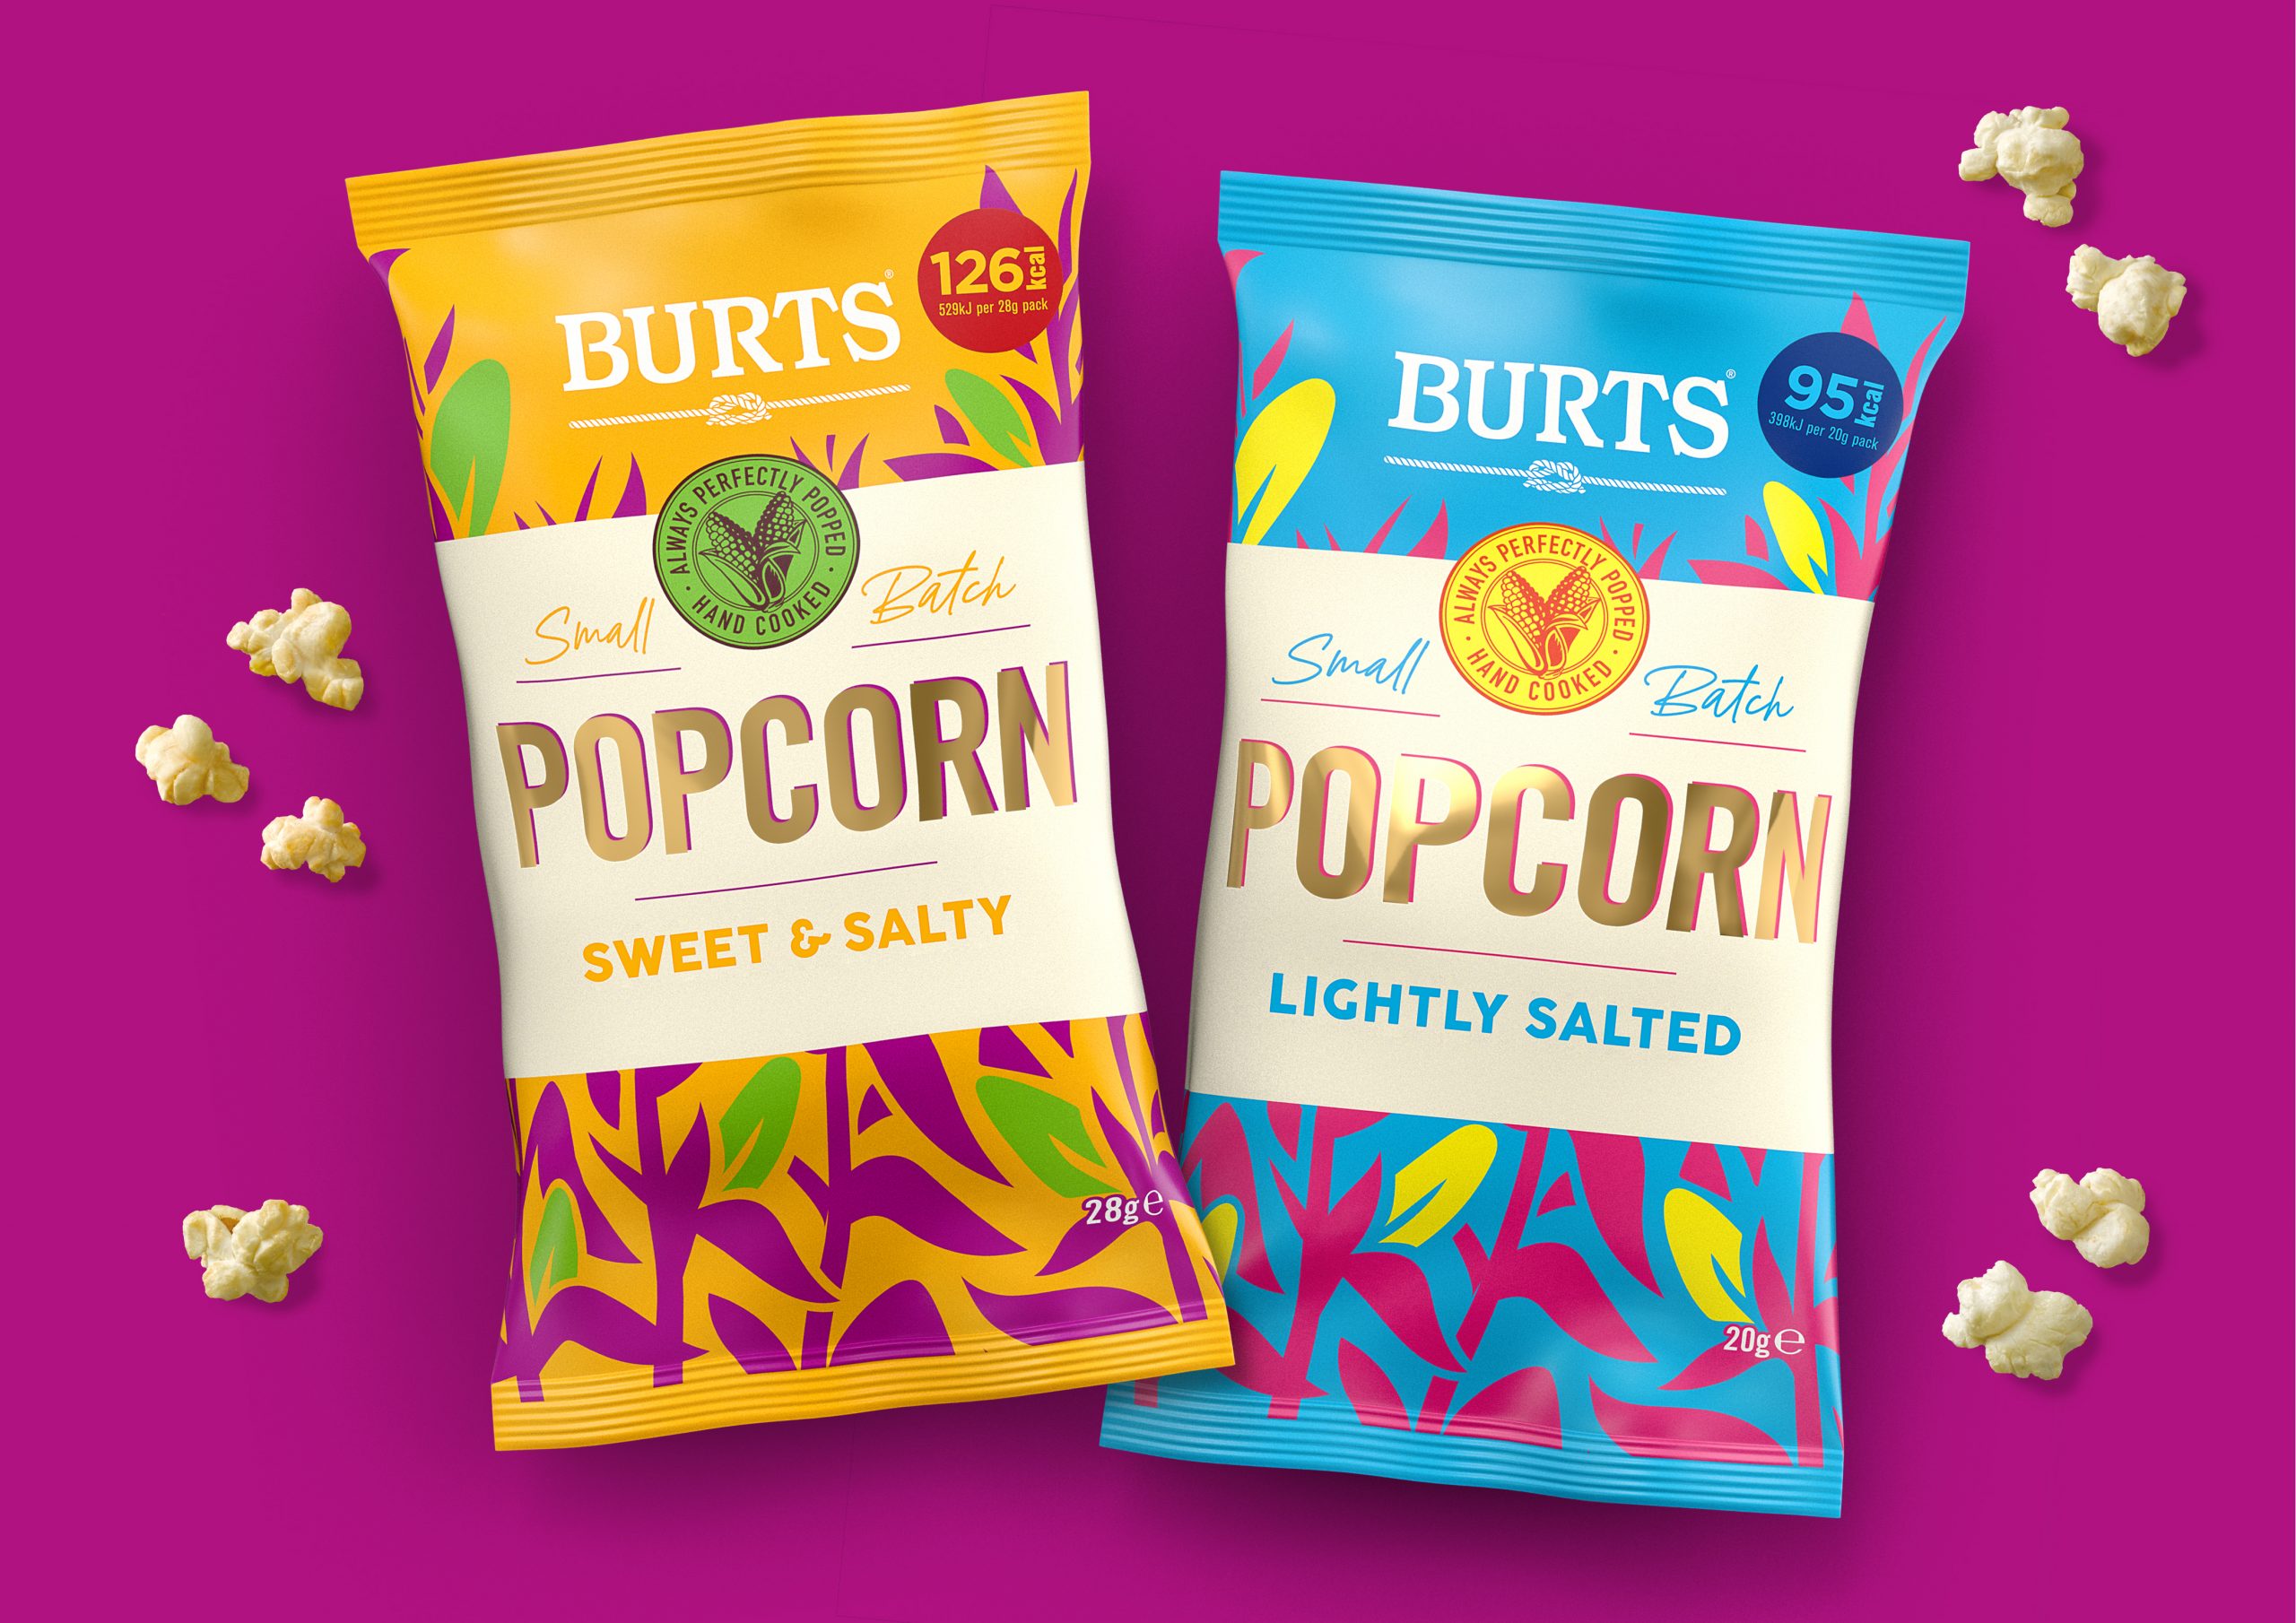 Burts Chips launches UK’s only hand-cooked popcorn